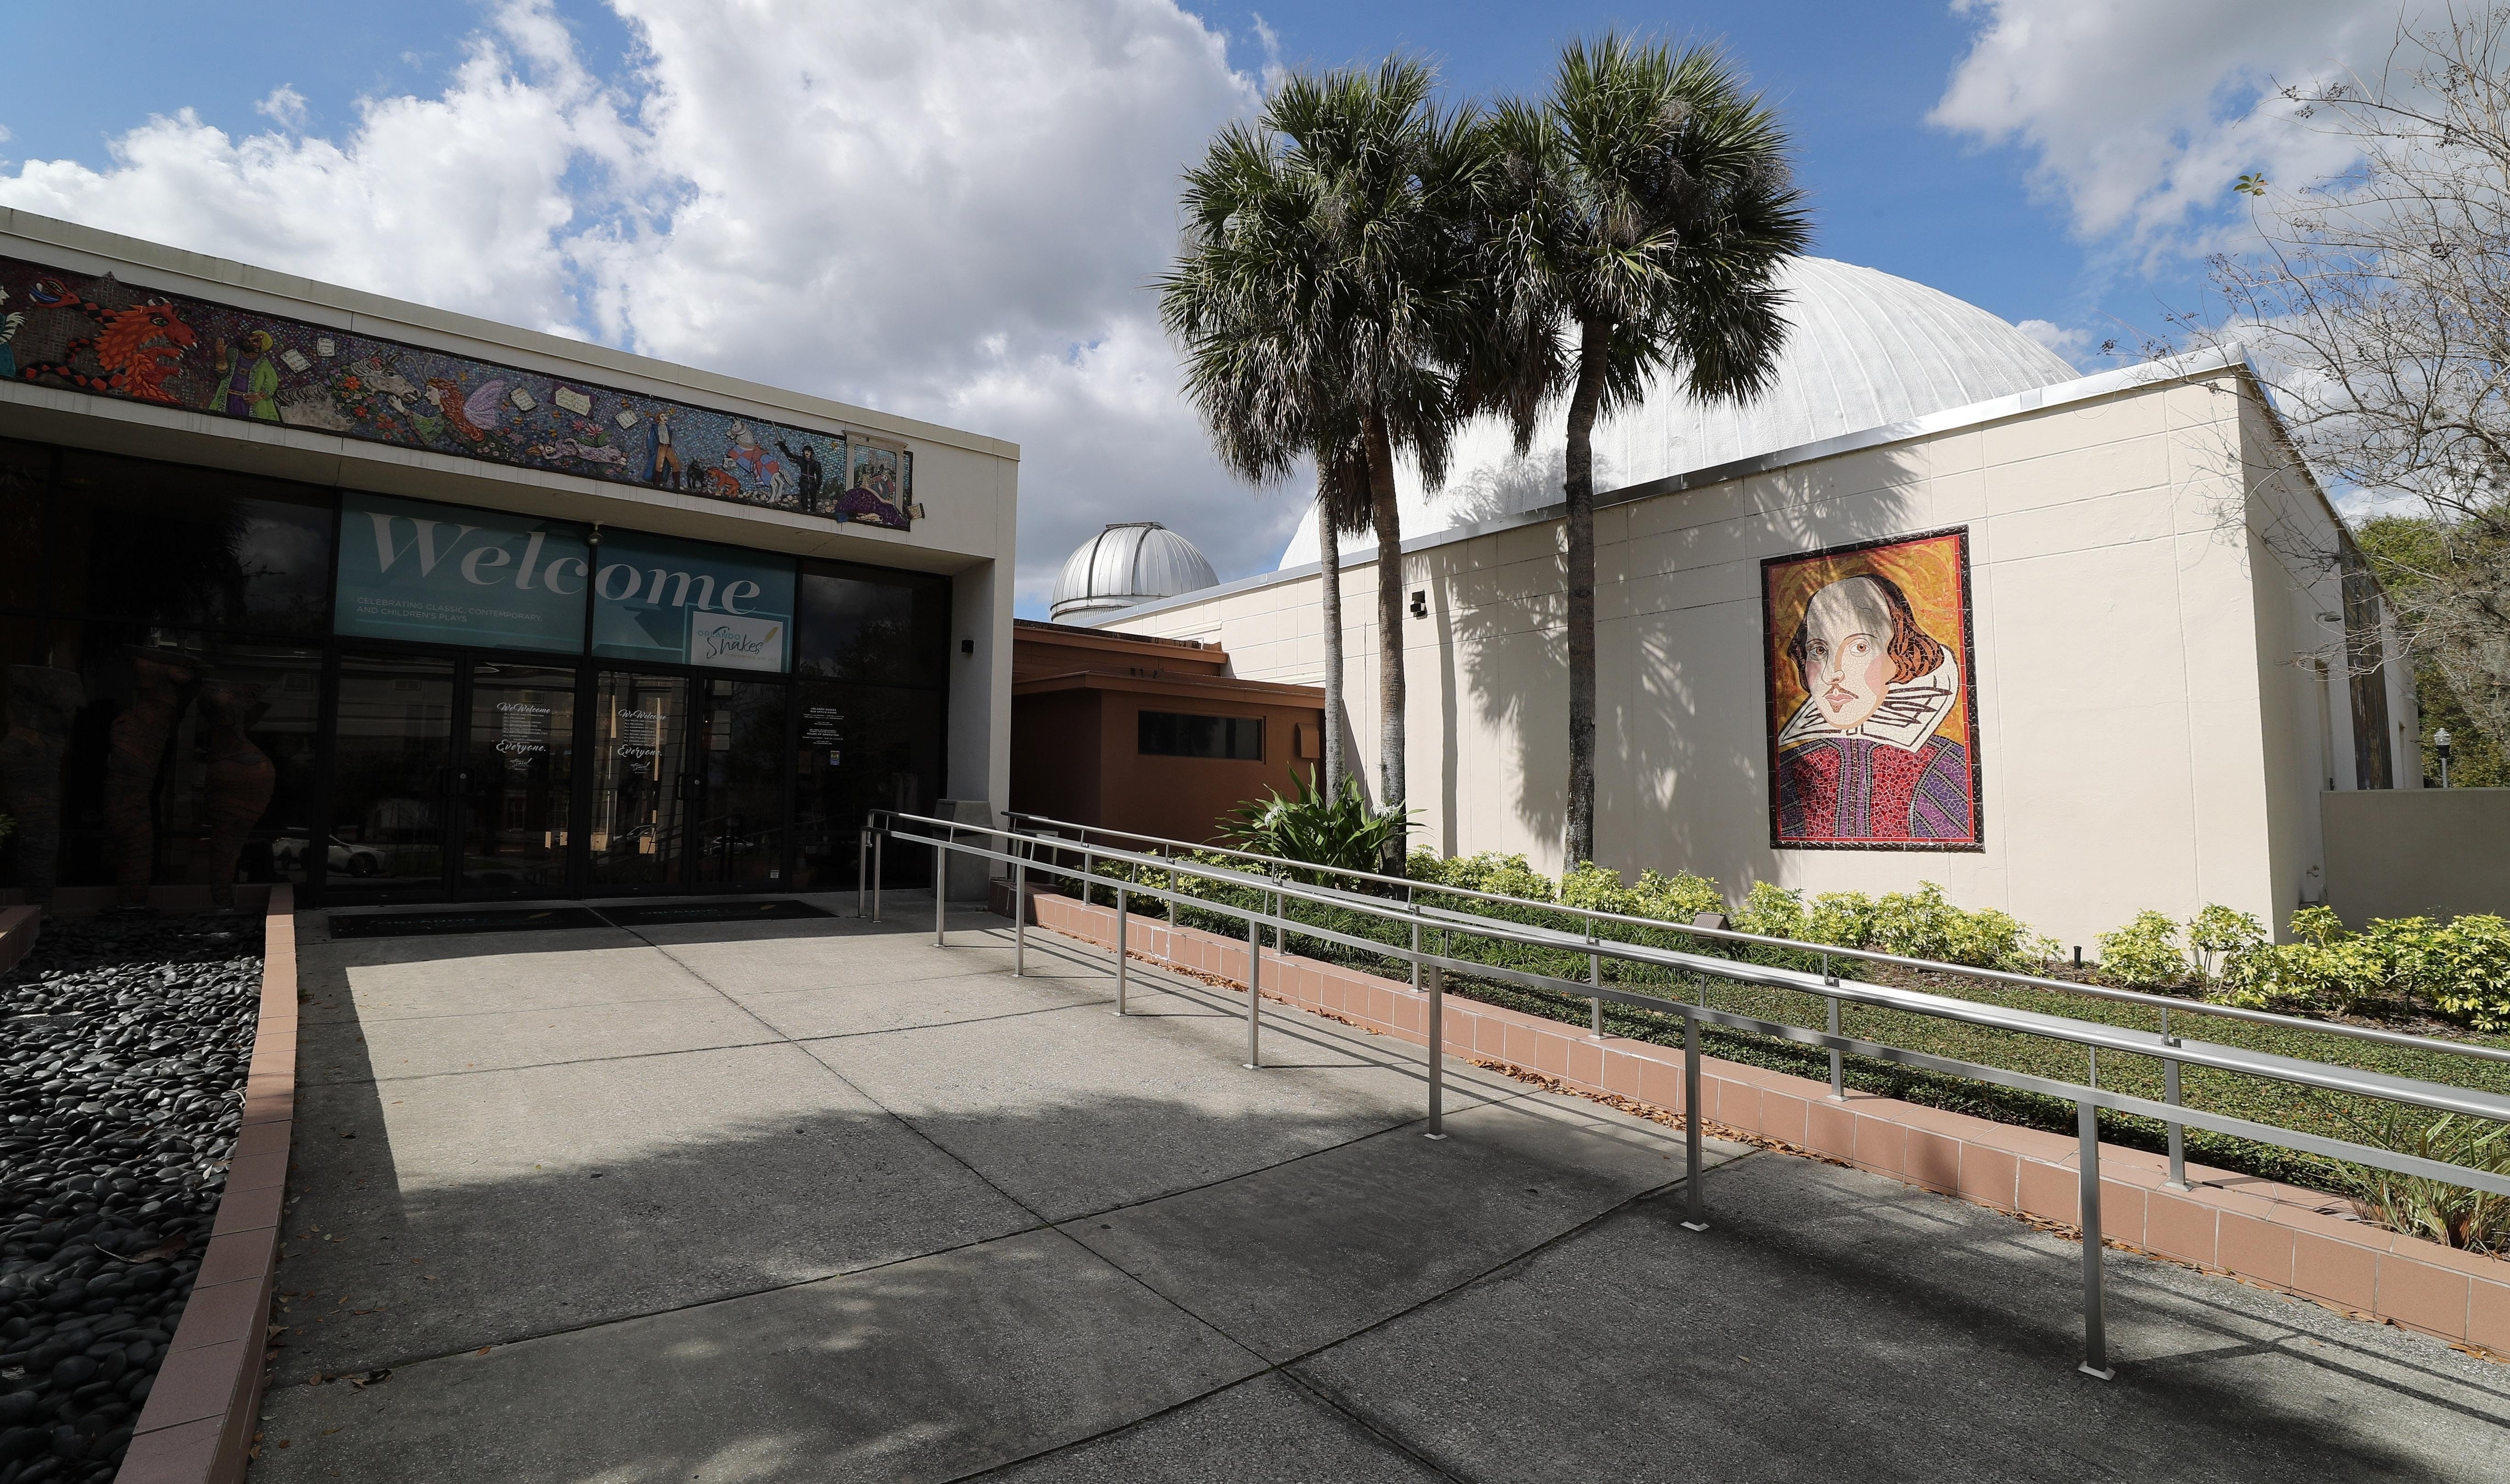 The city of Orlando owns the Lowndes Shakespeare Center and leases it to Orlando Shakes for $1 per year as part of its commitment to the arts. (Ricardo Ramirez Buxeda/Orlando Sentinel)